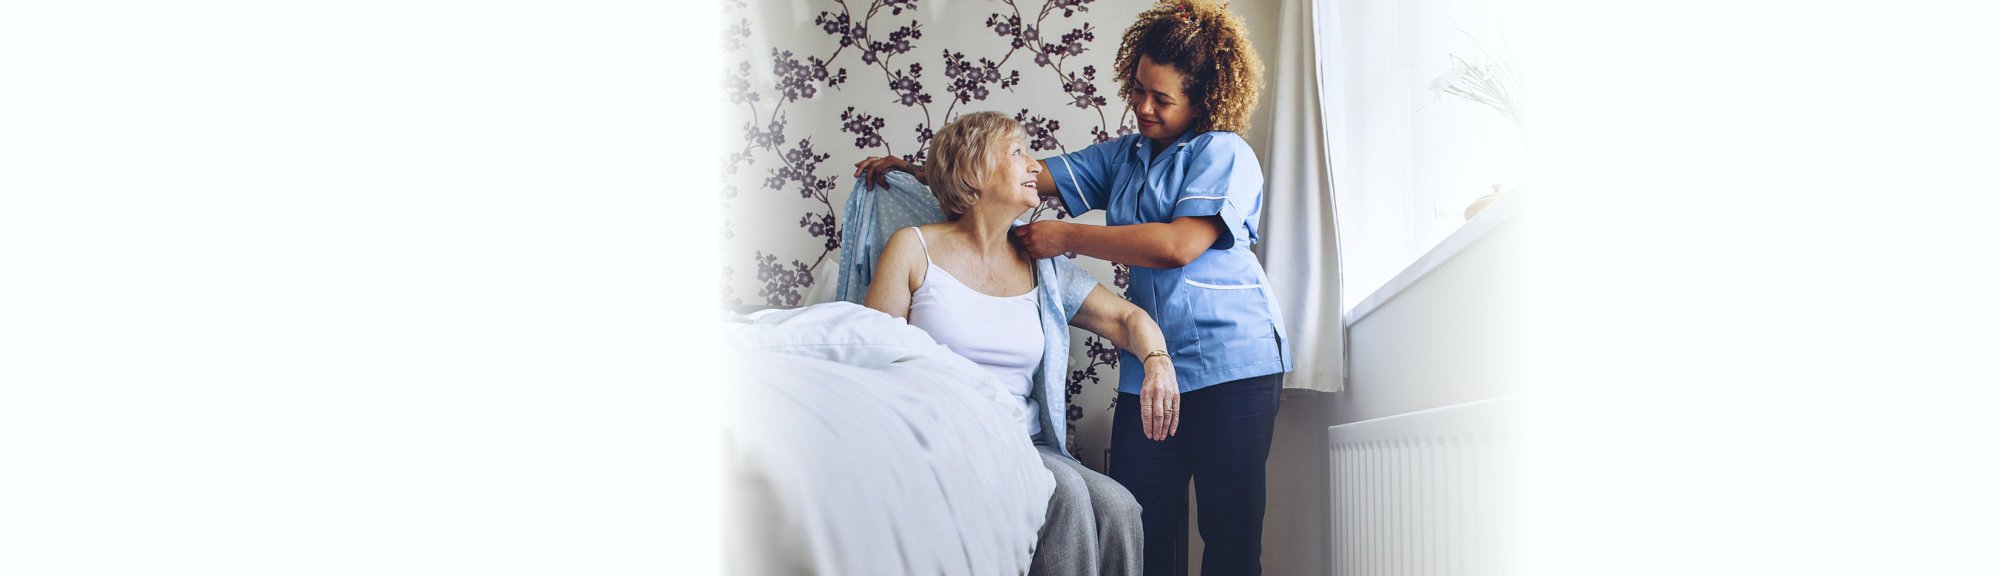 caregiver dressing her patient in bed